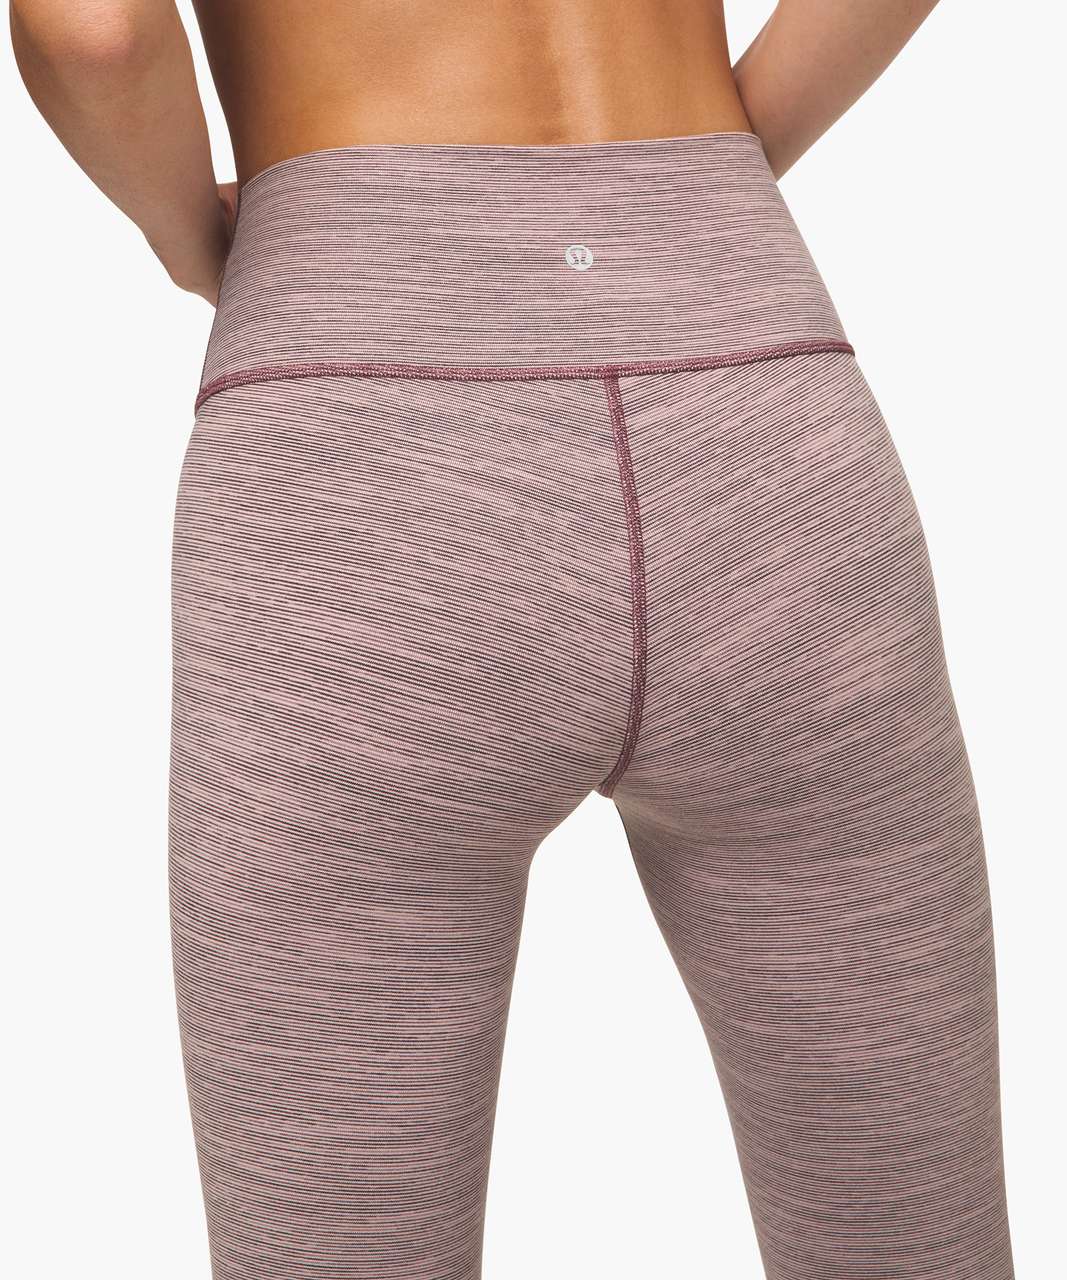 Lululemon Wunder Under High-Rise Tight 25 - Wee Are From Space